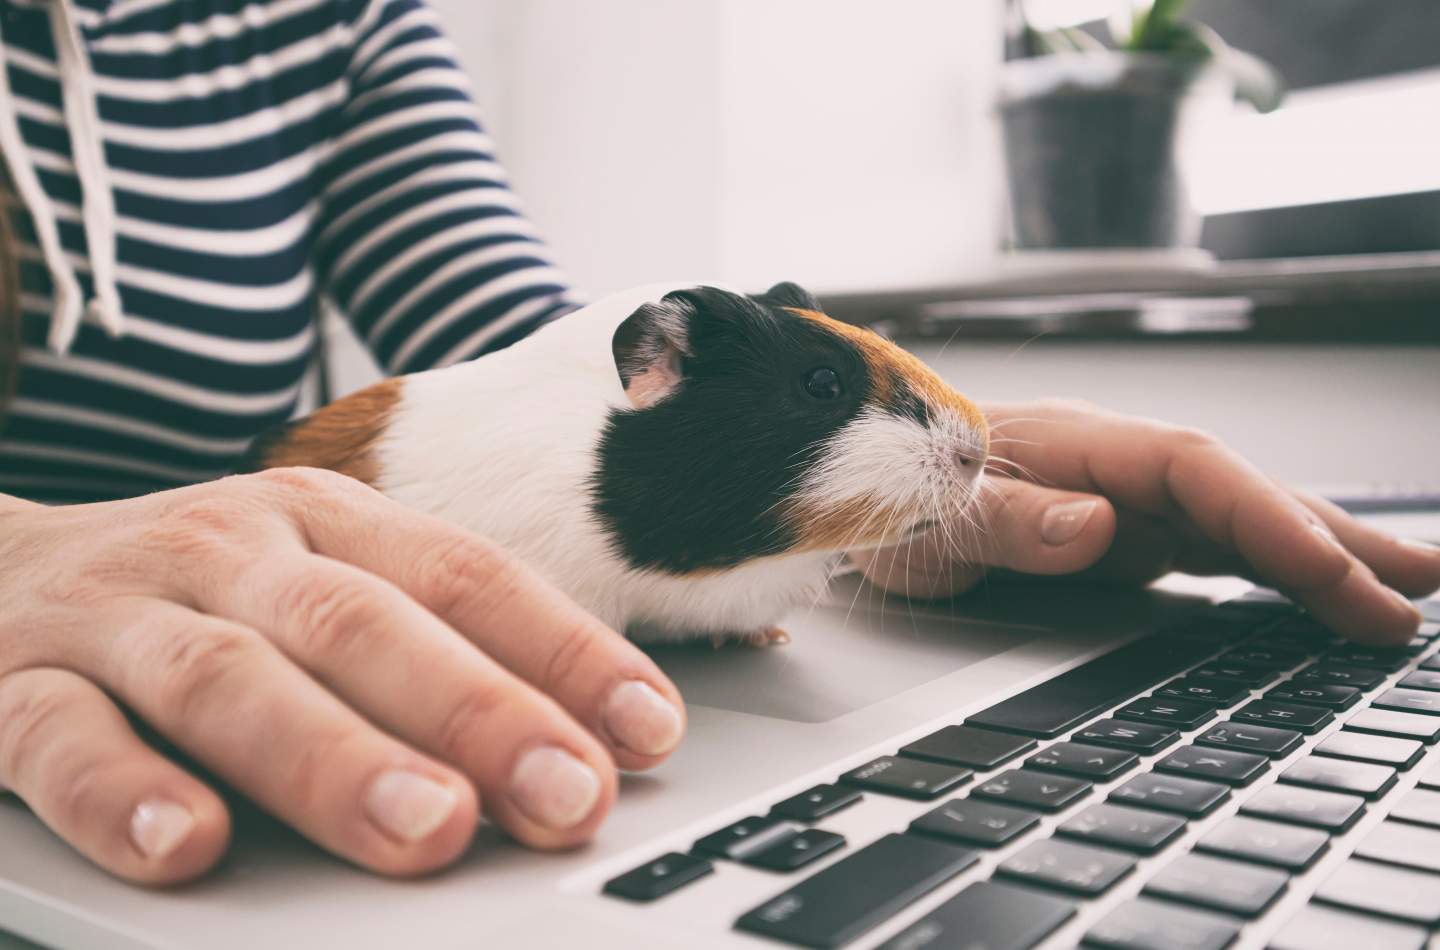 Guinea pig at a laptop keyboard 